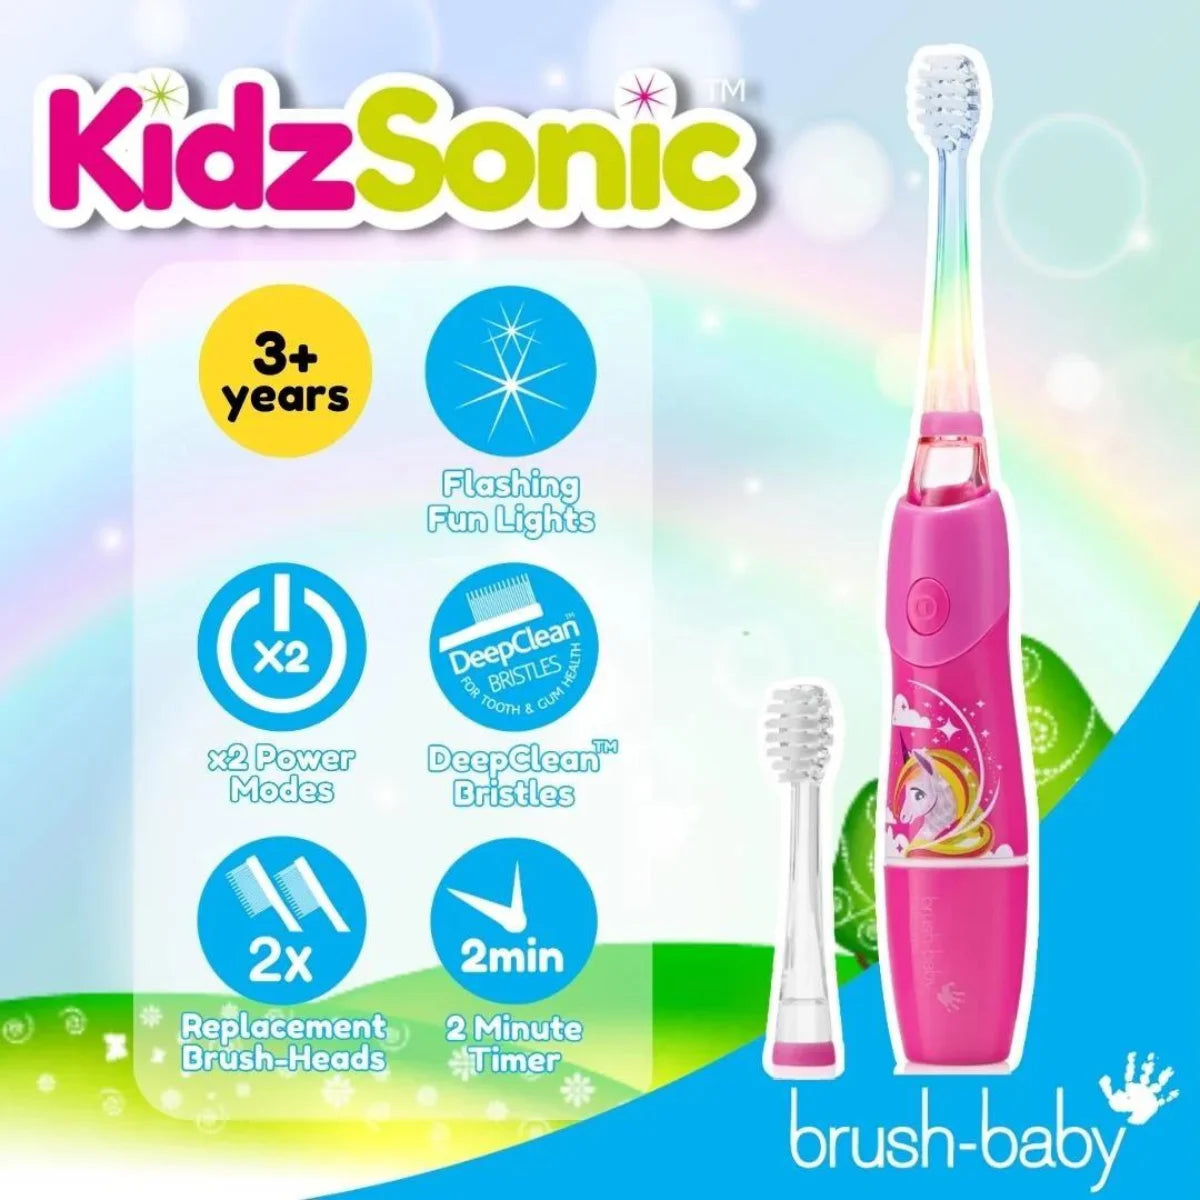 Brush-Baby Kids Sonic electric toothbrushes